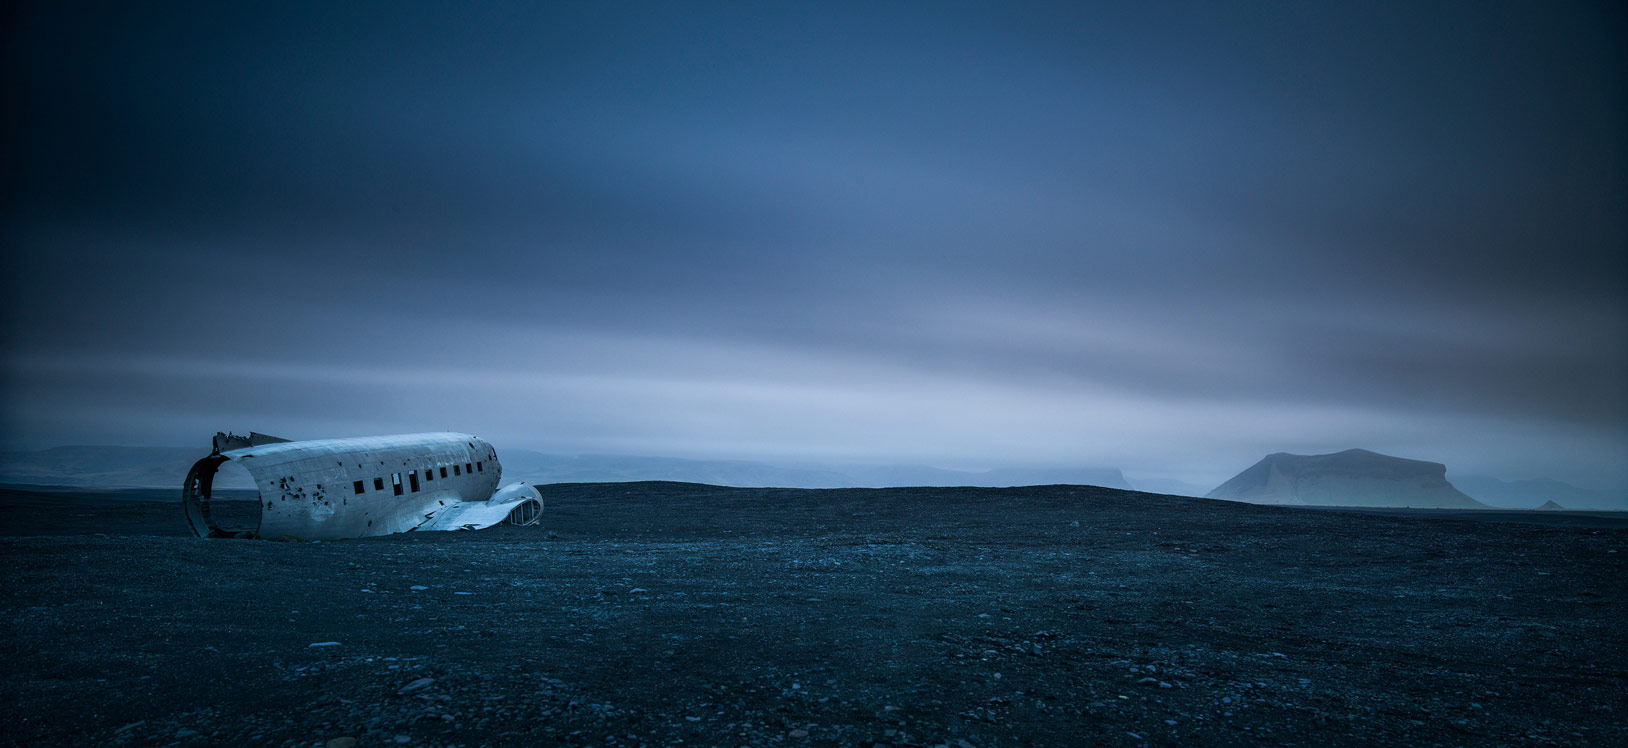 Long exposure of DC-3 crash site in Iceland